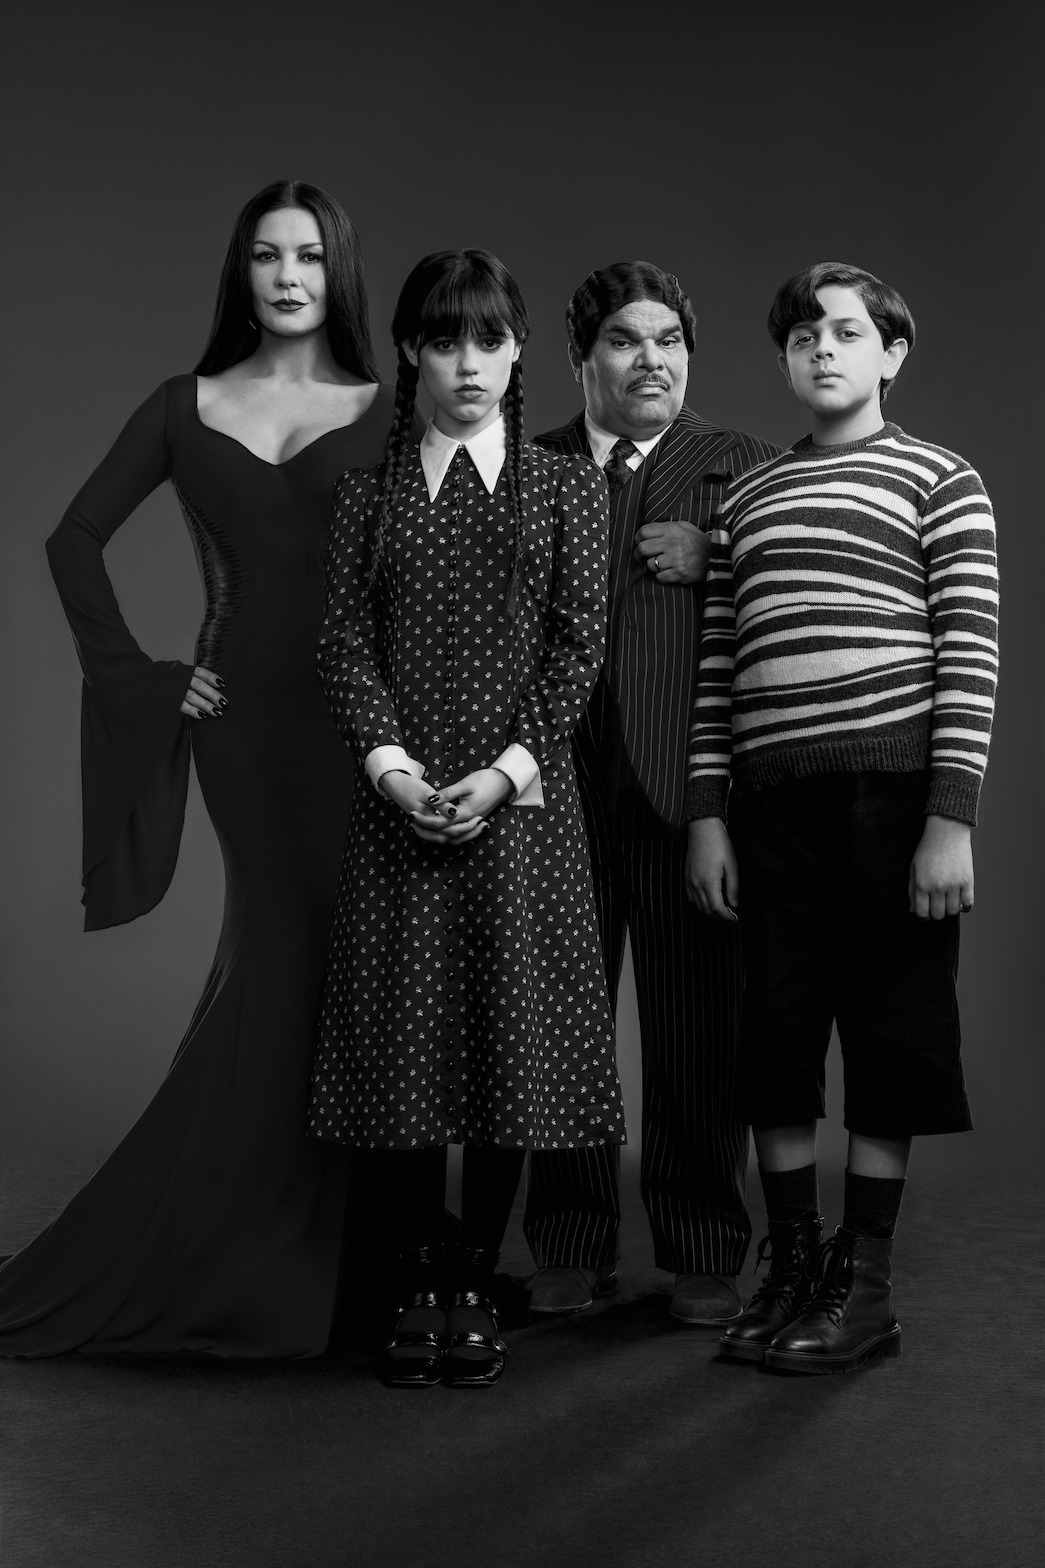 Wednesday' Drops New Addams Family Photo and Teaser